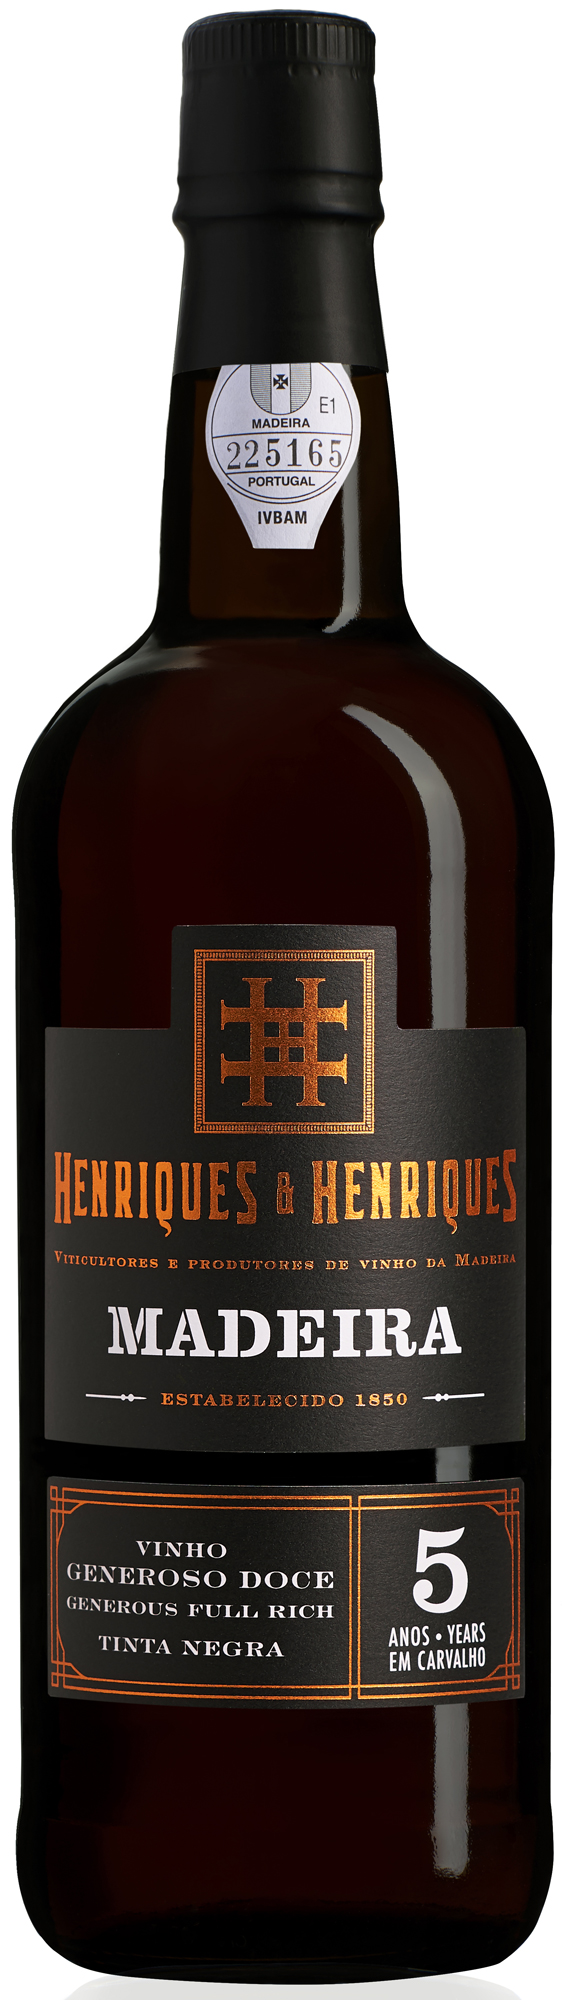 Henriques & Henriques - Generoso Doce 5 Anos Madeira (750ml) (750ml)